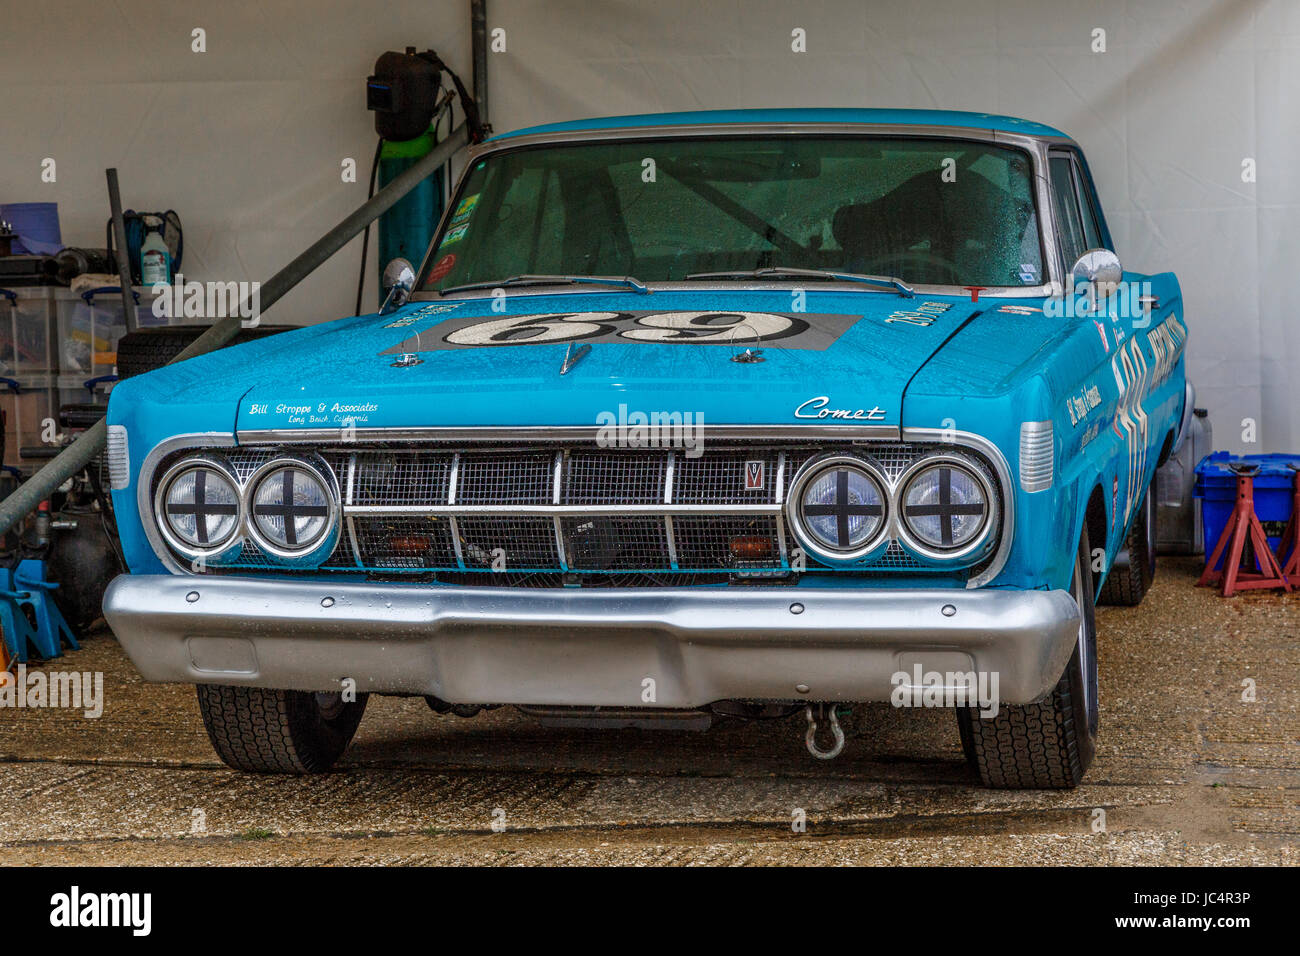 1964 Mercury Comet Cyclone, Pierpoint Cup entrant, in the paddock at the Goodwood GRRC 75th Members Meeting, Sussex, UK. Stock Photo